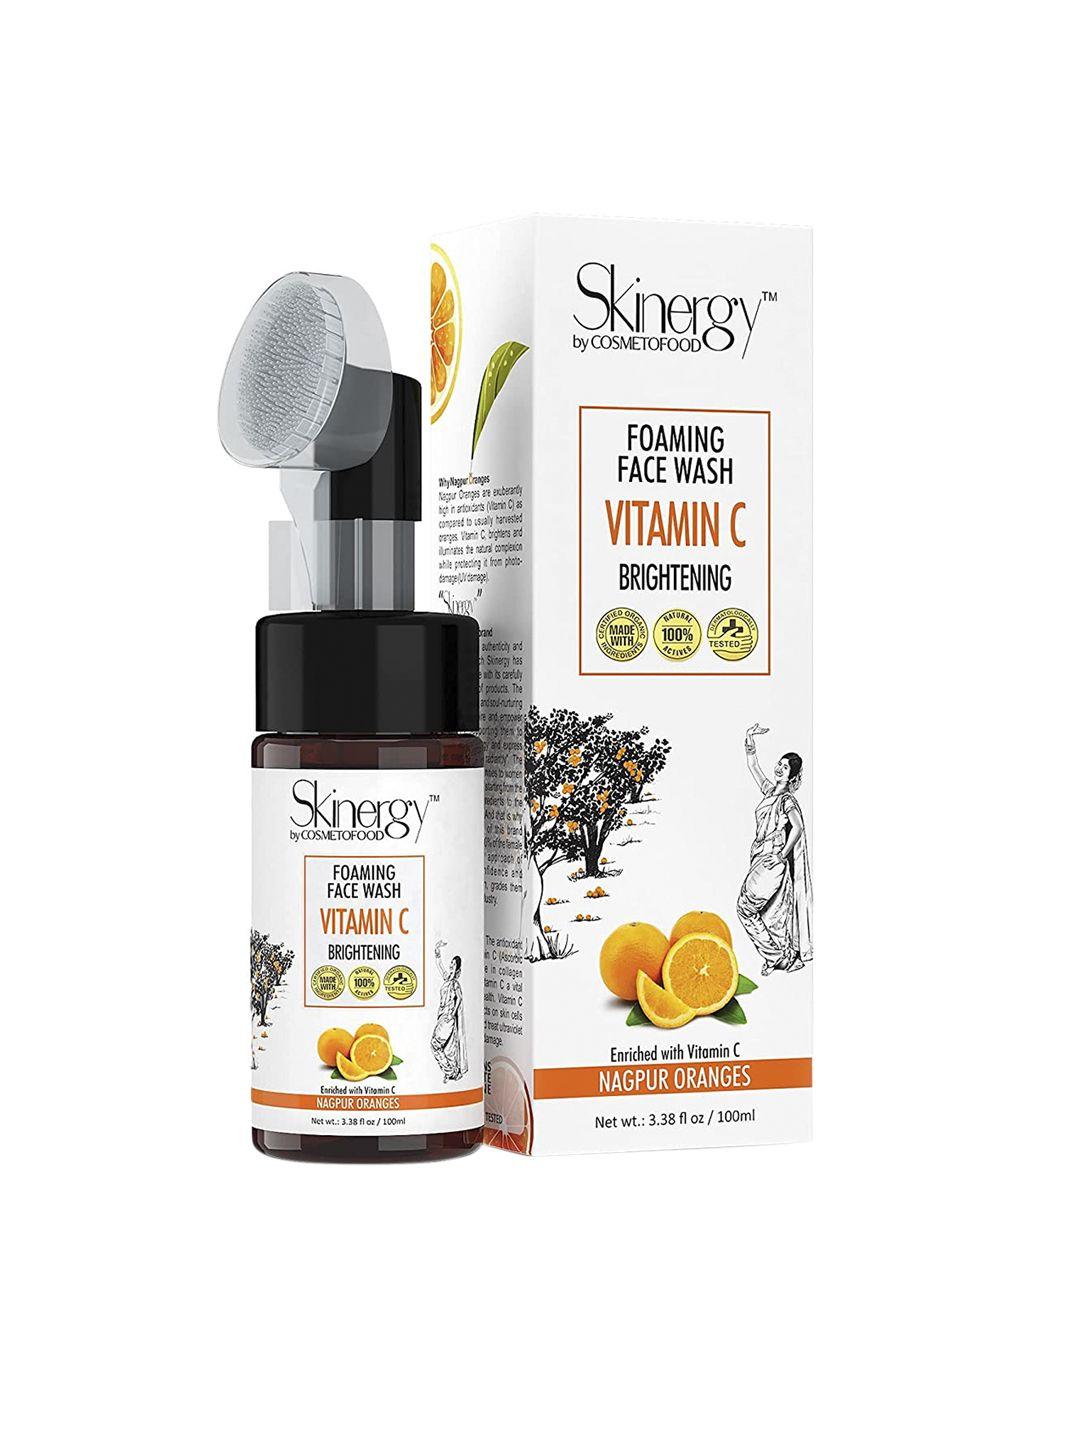 cosmetofood skinergy vitamin-c brightening foaming face wash 100ml